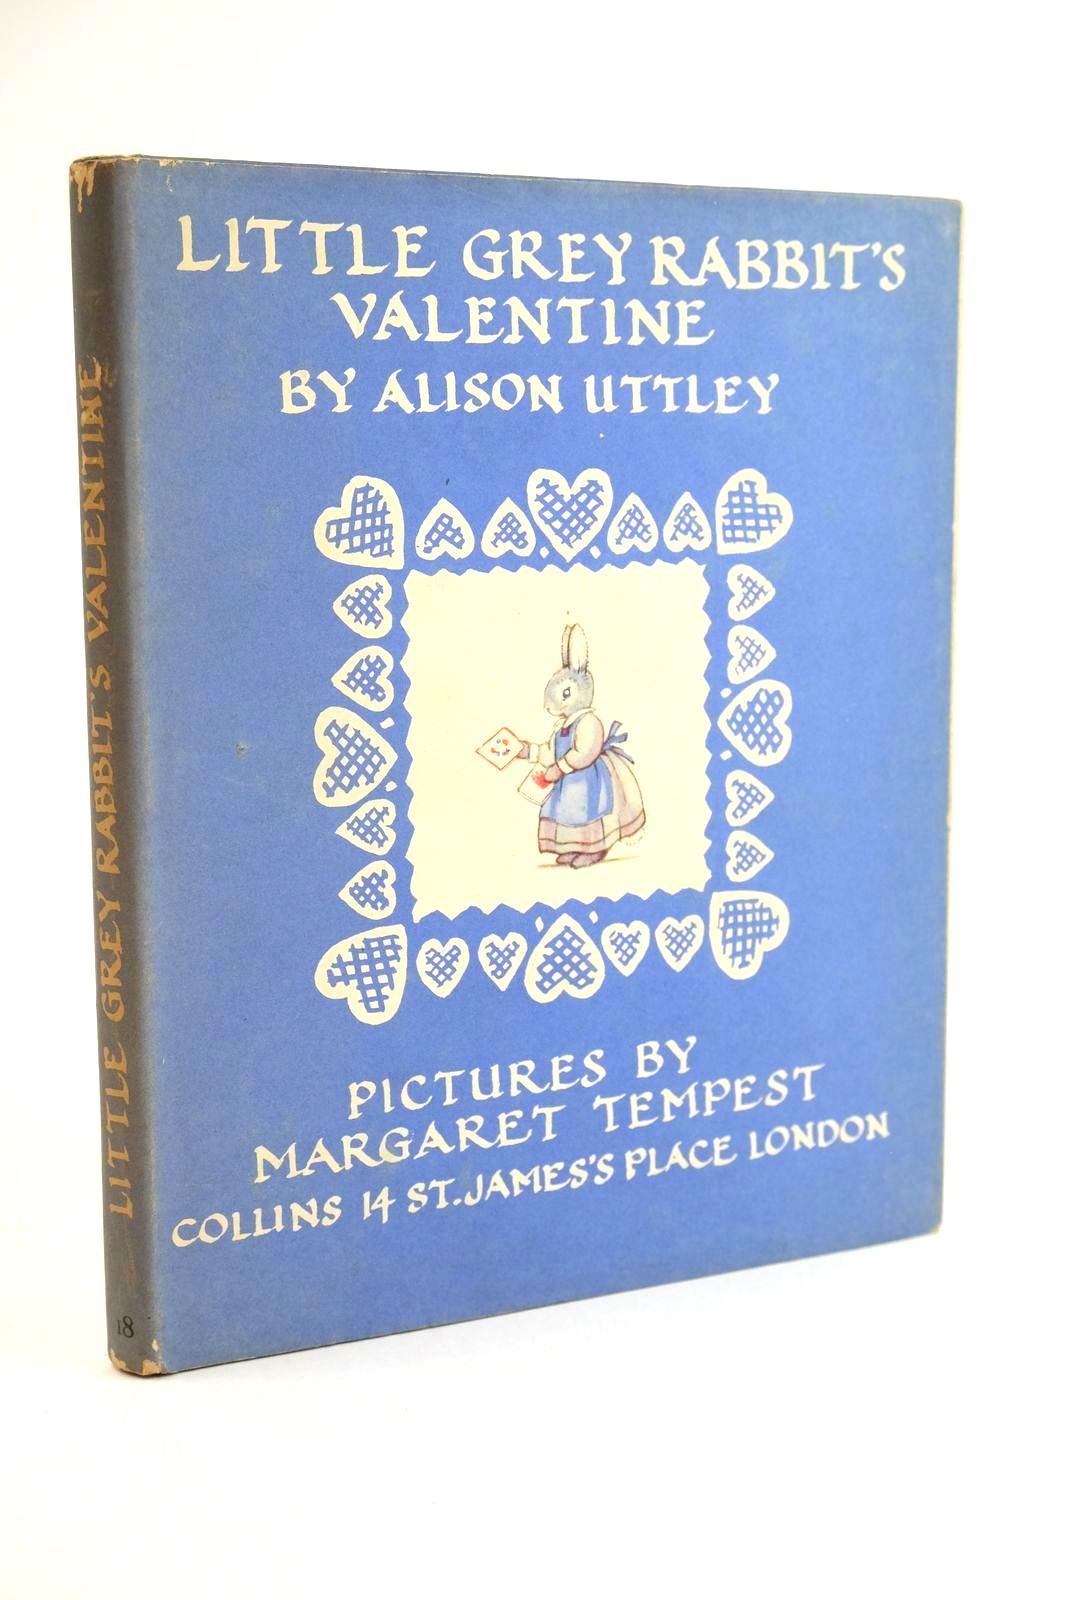 Photo of LITTLE GREY RABBIT'S VALENTINE written by Uttley, Alison illustrated by Tempest, Margaret published by Collins (STOCK CODE: 1323455)  for sale by Stella & Rose's Books